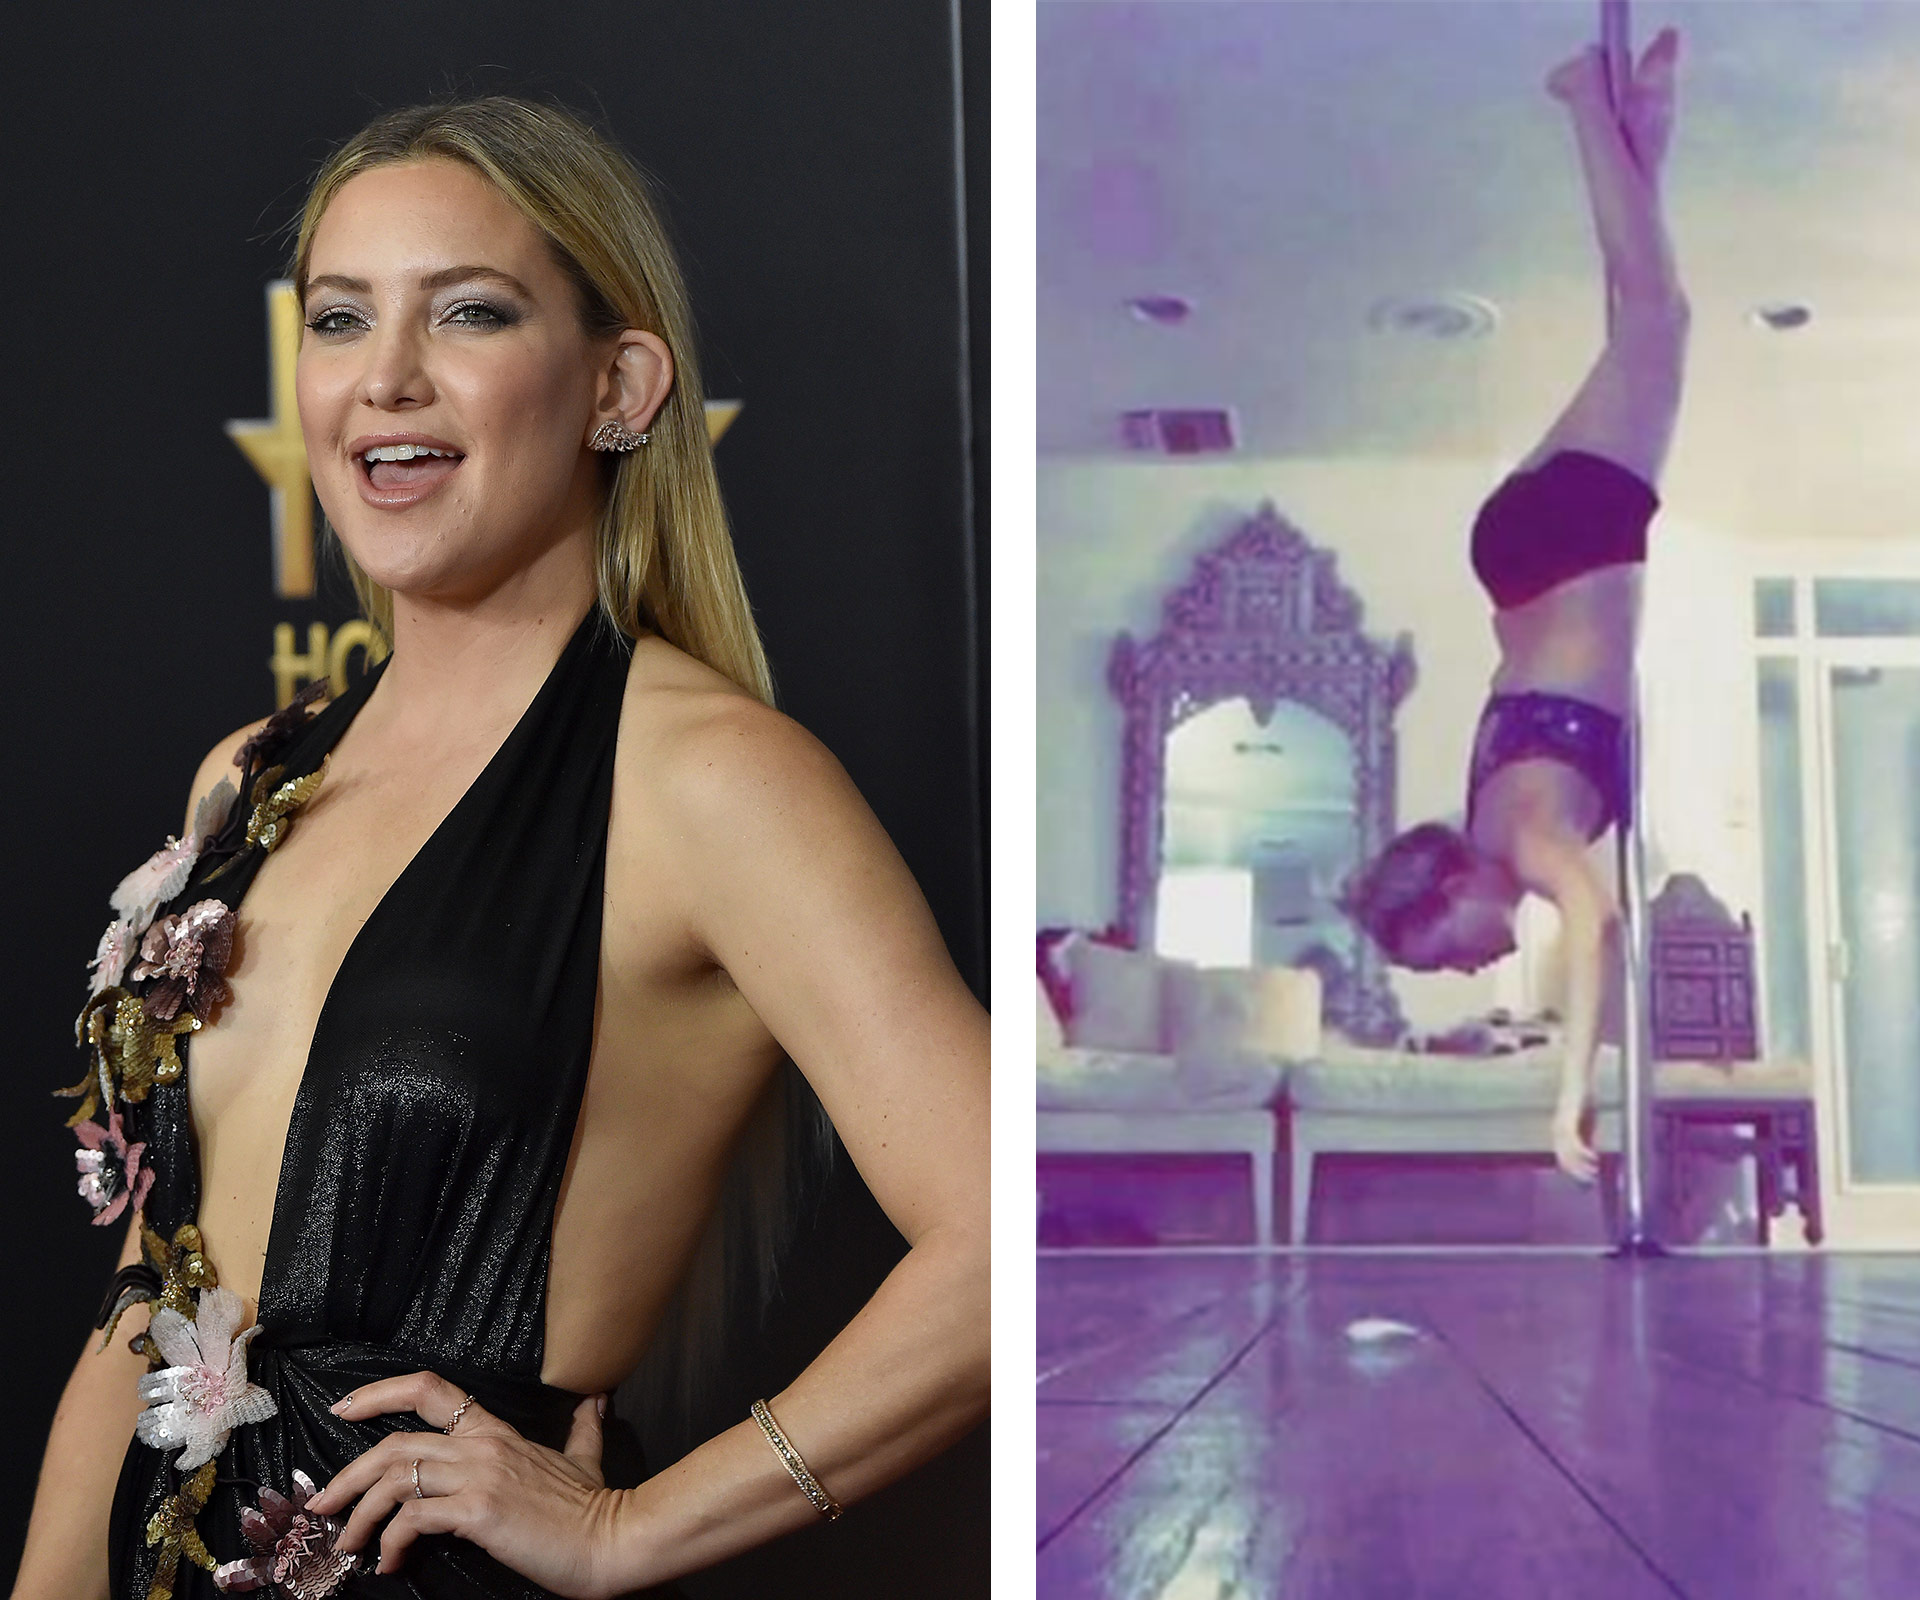 Kate Hudson pole dancing is the #fitspiration we all need